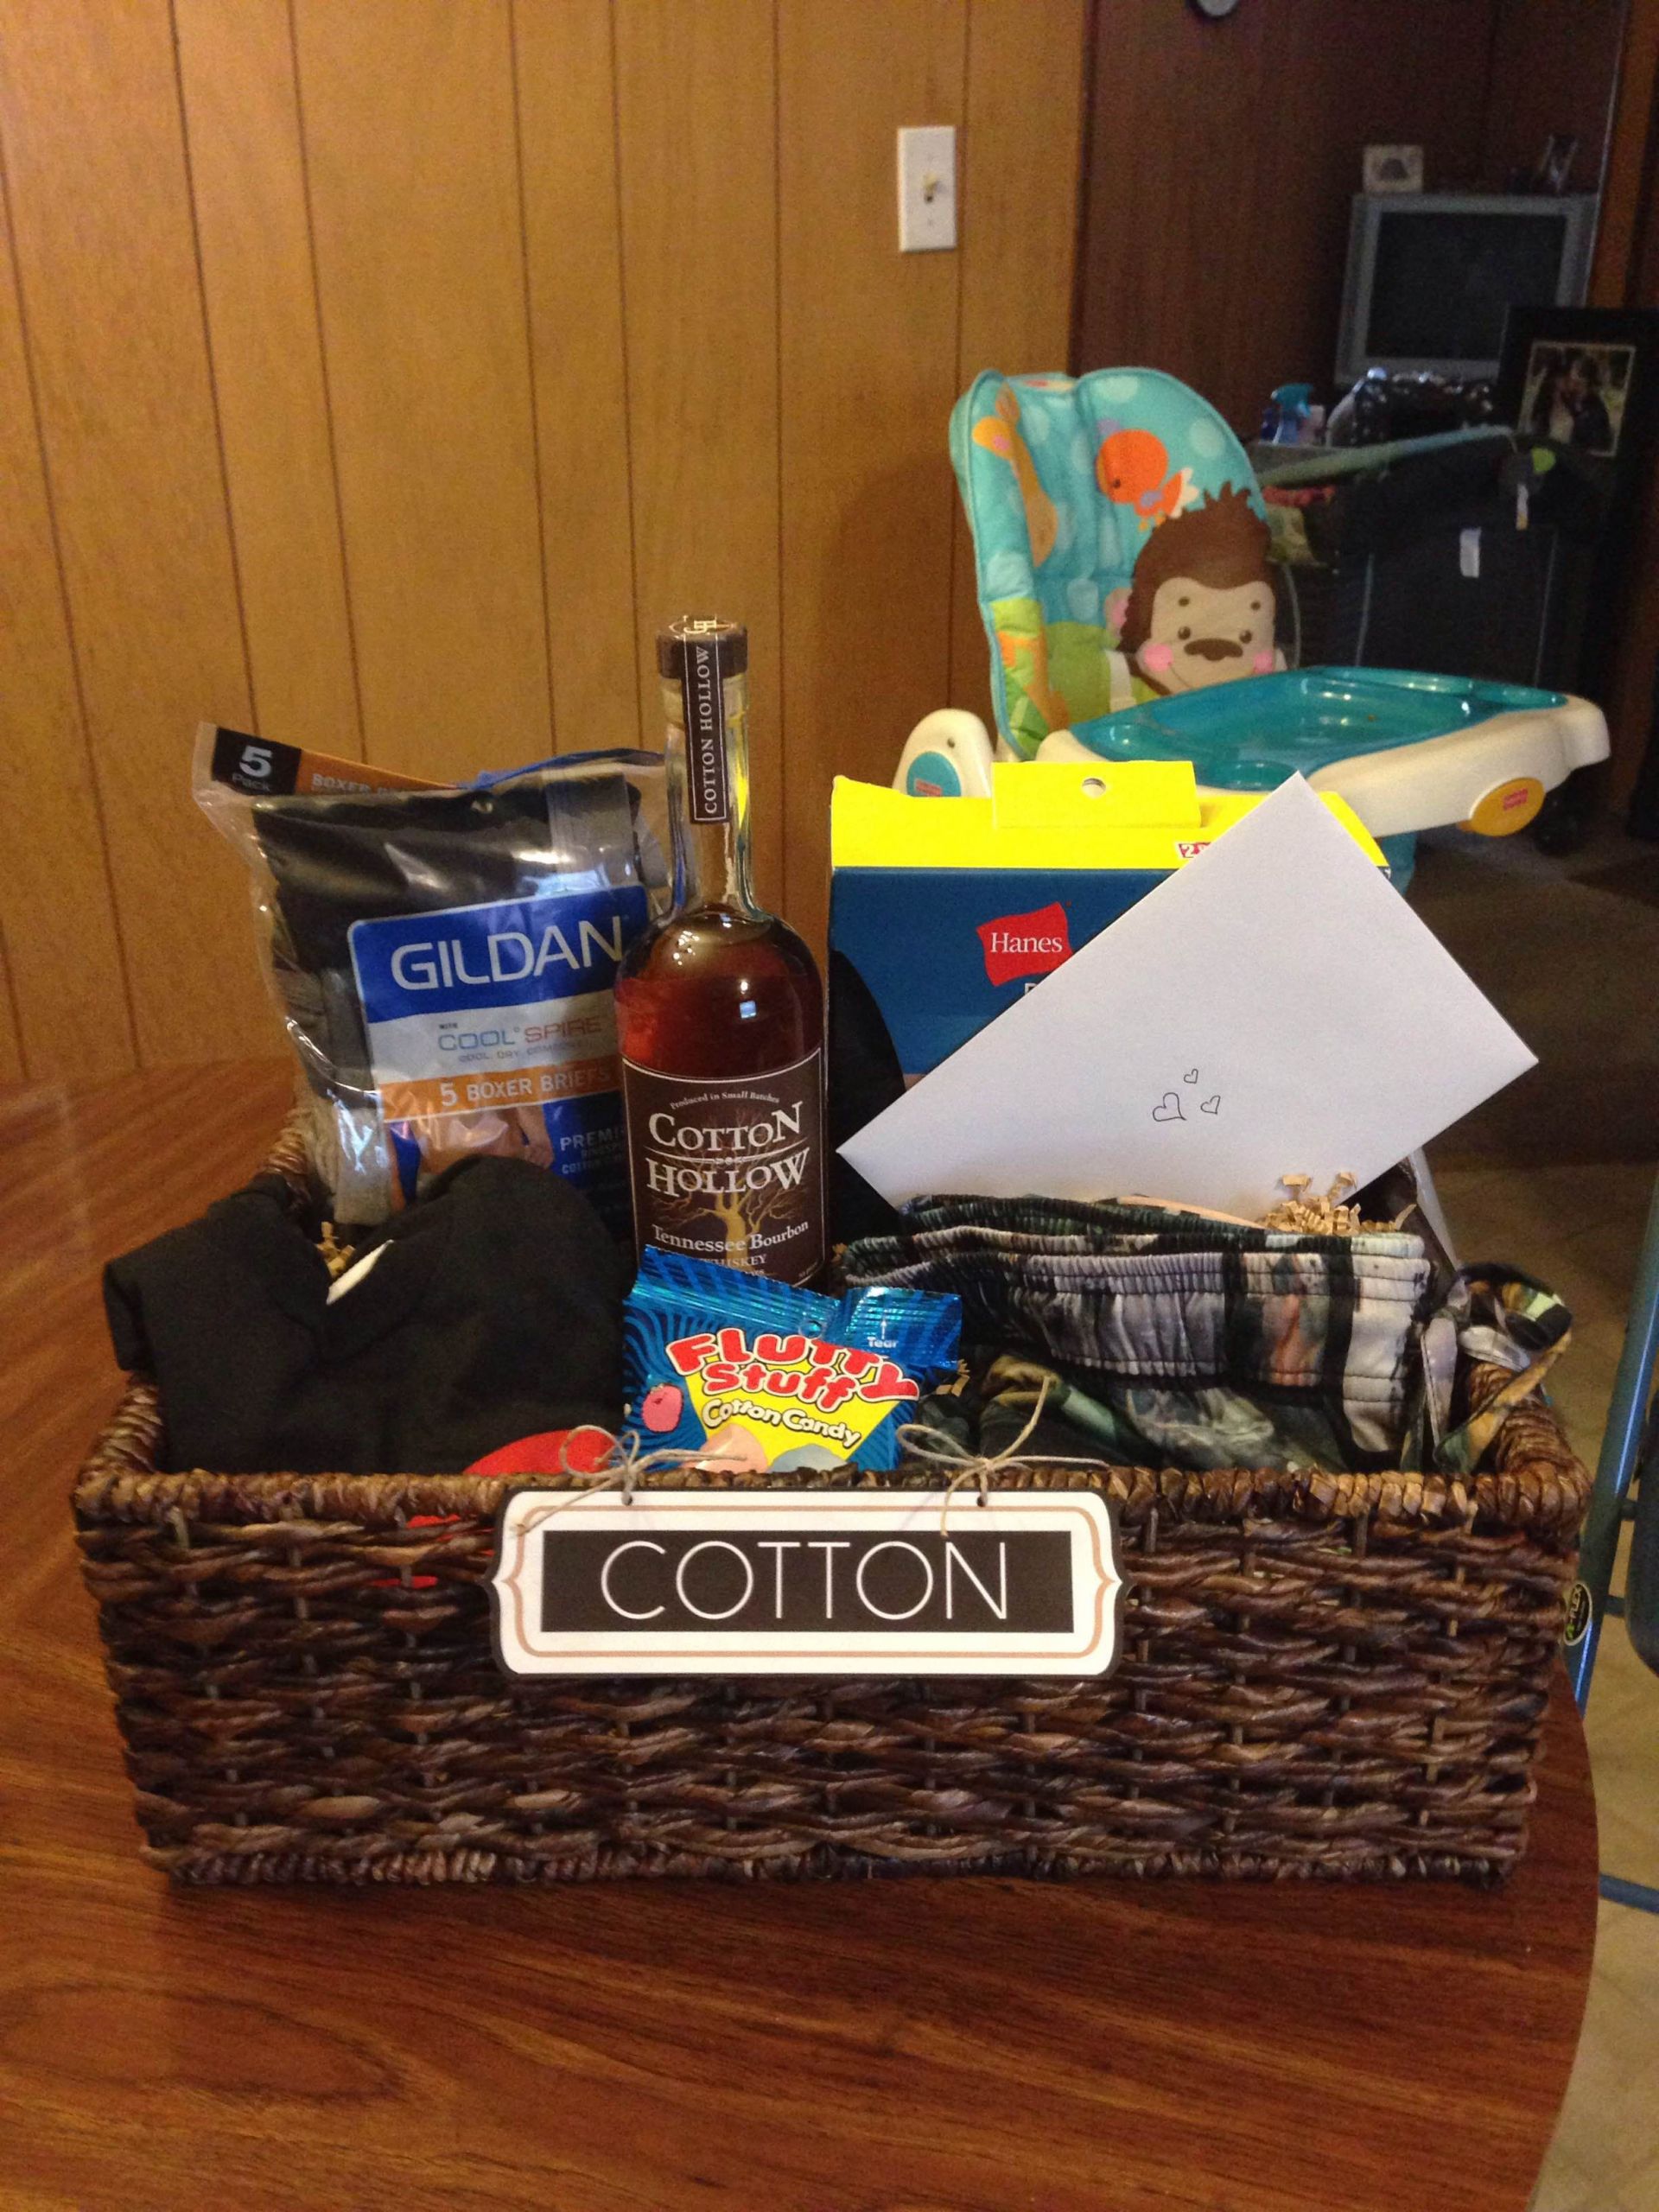 2Nd Year Anniversary Gift Ideas For Him
 "Cotton" t basket I put to her for my husband for our